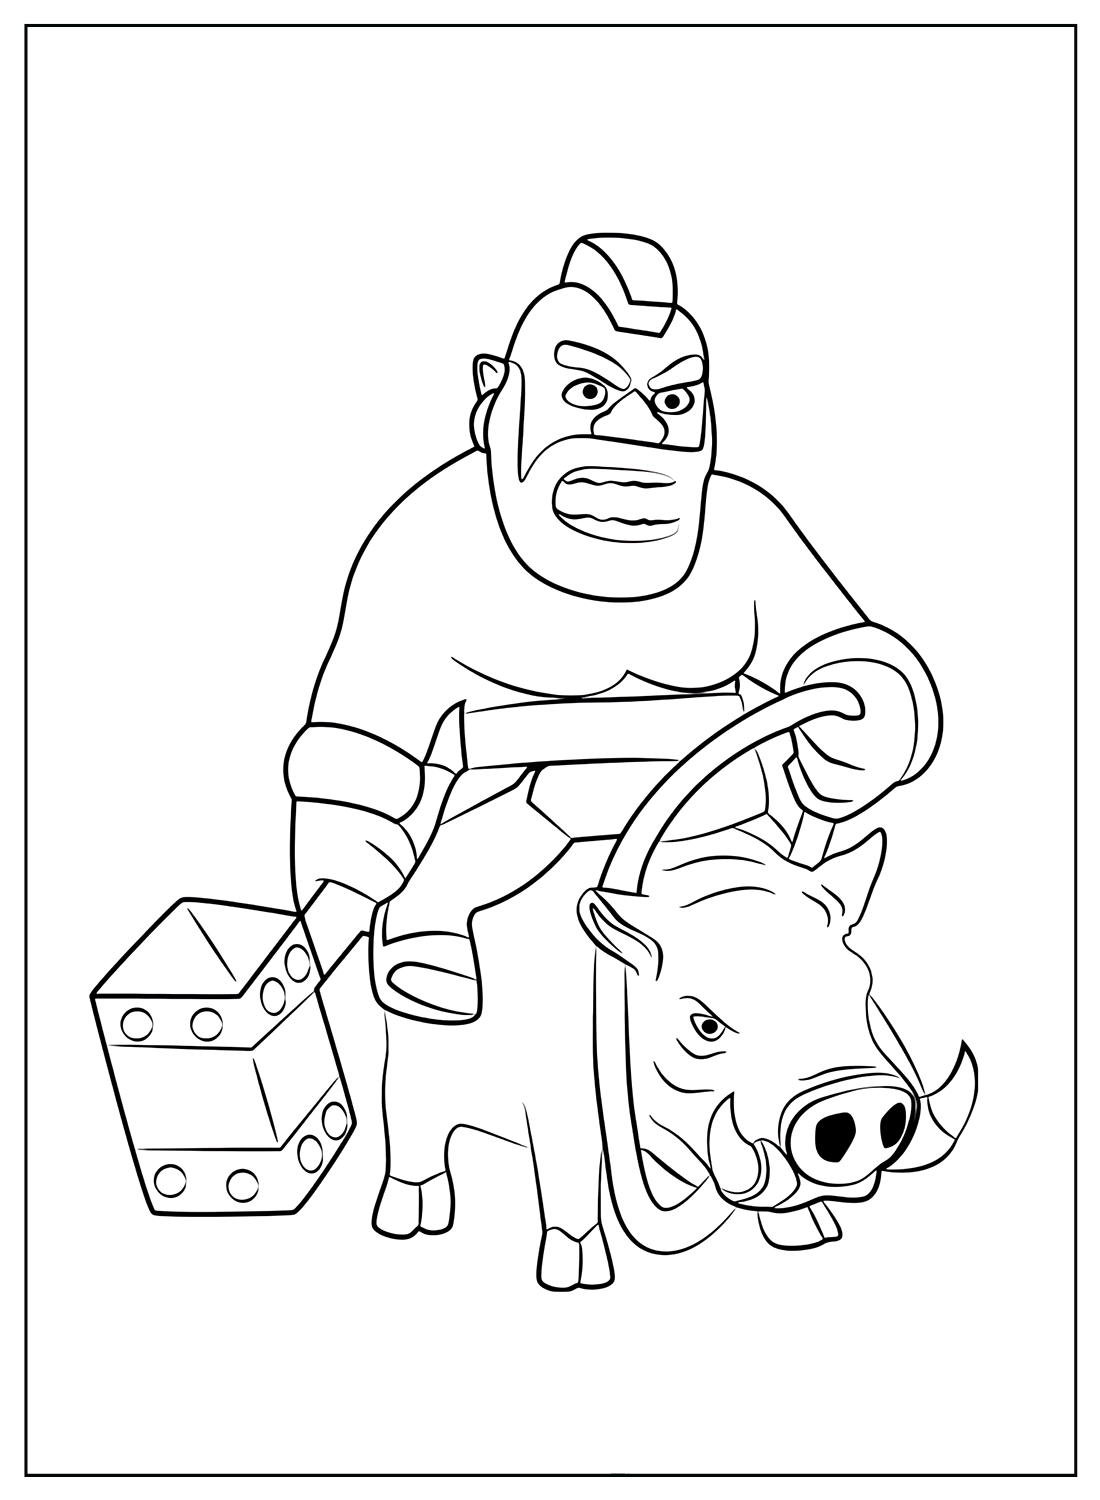 Free Clash of Clans Coloring Pages from Clash of Clans